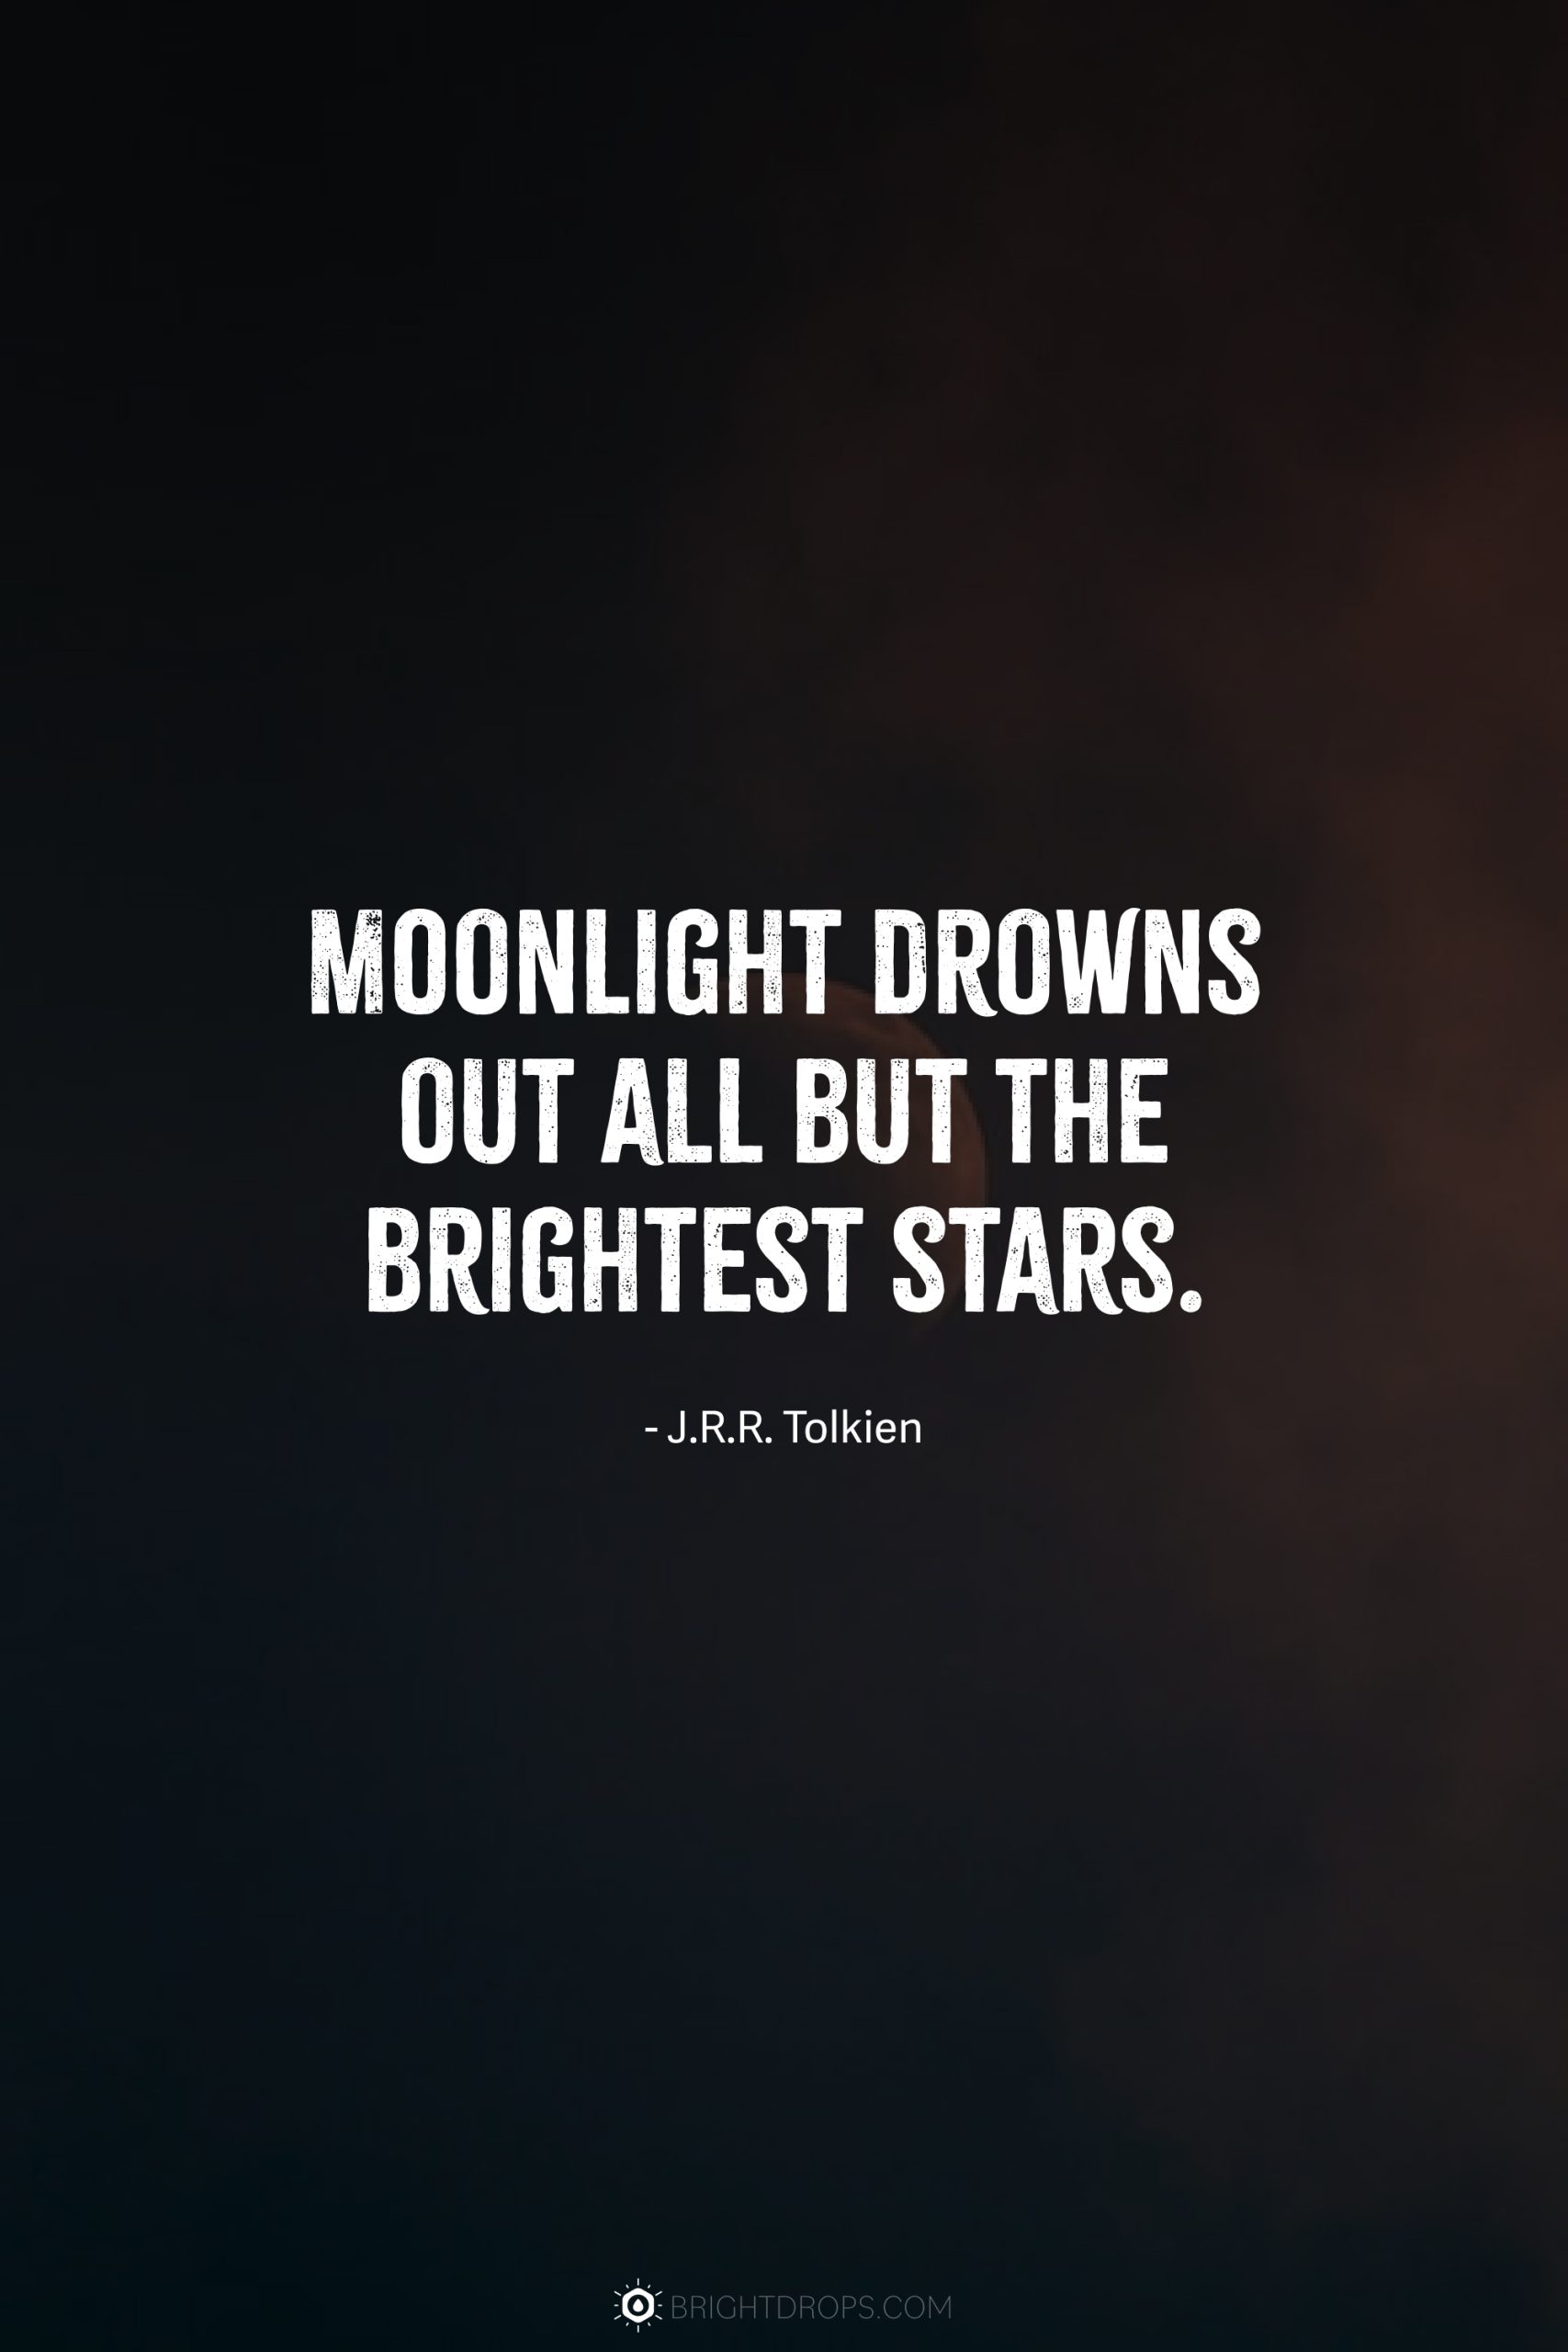 Moonlight drowns out all but the brightest stars.